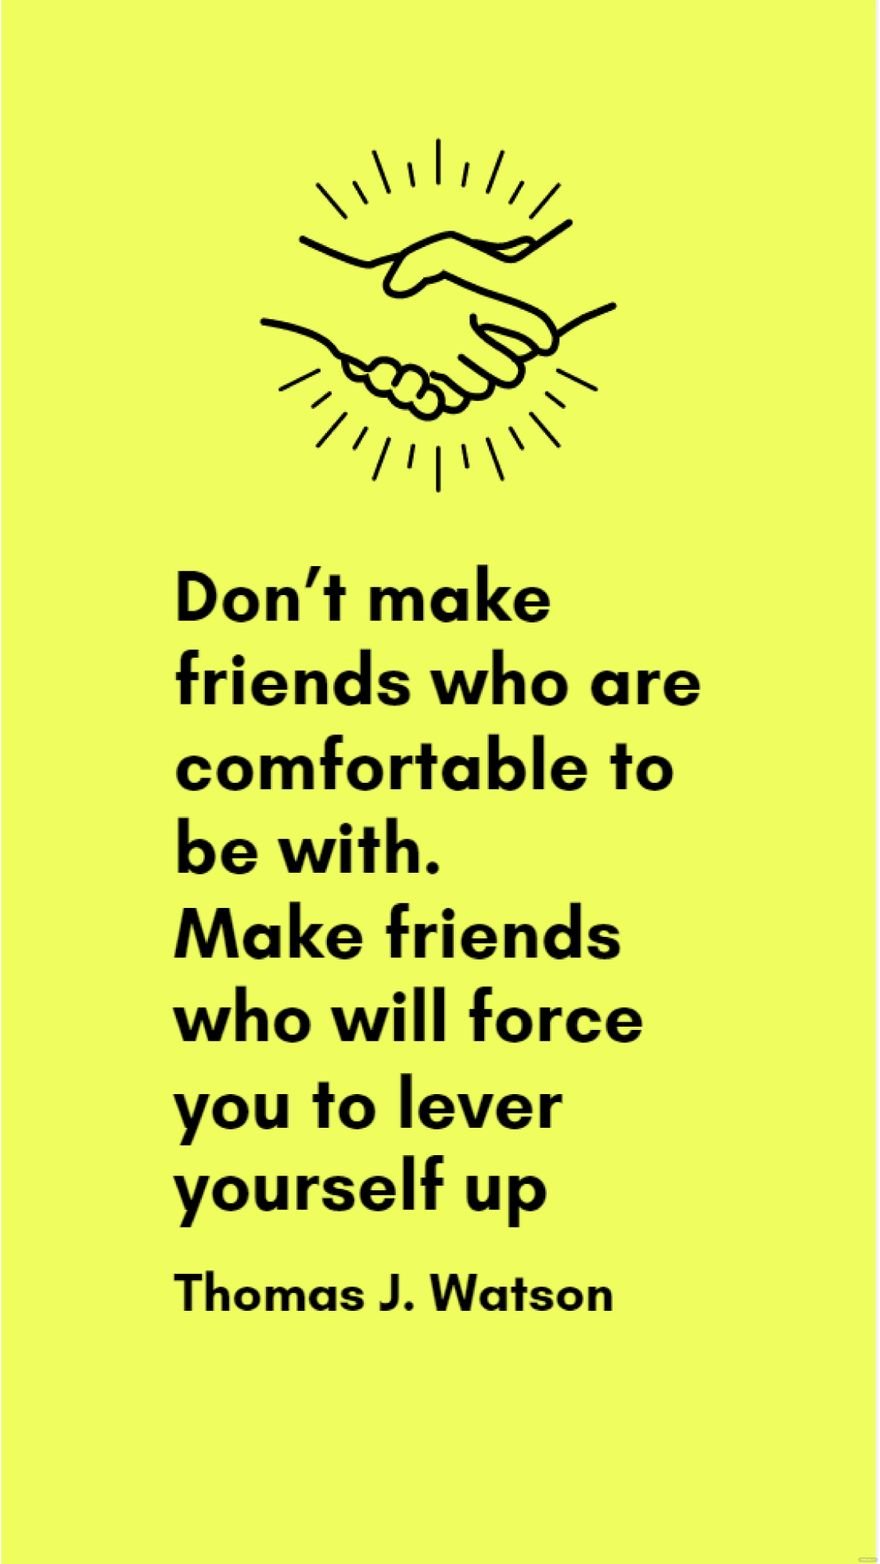 Thomas J. Watson - Don’t make friends who are comfortable to be with. Make friends who will force you to lever yourself up